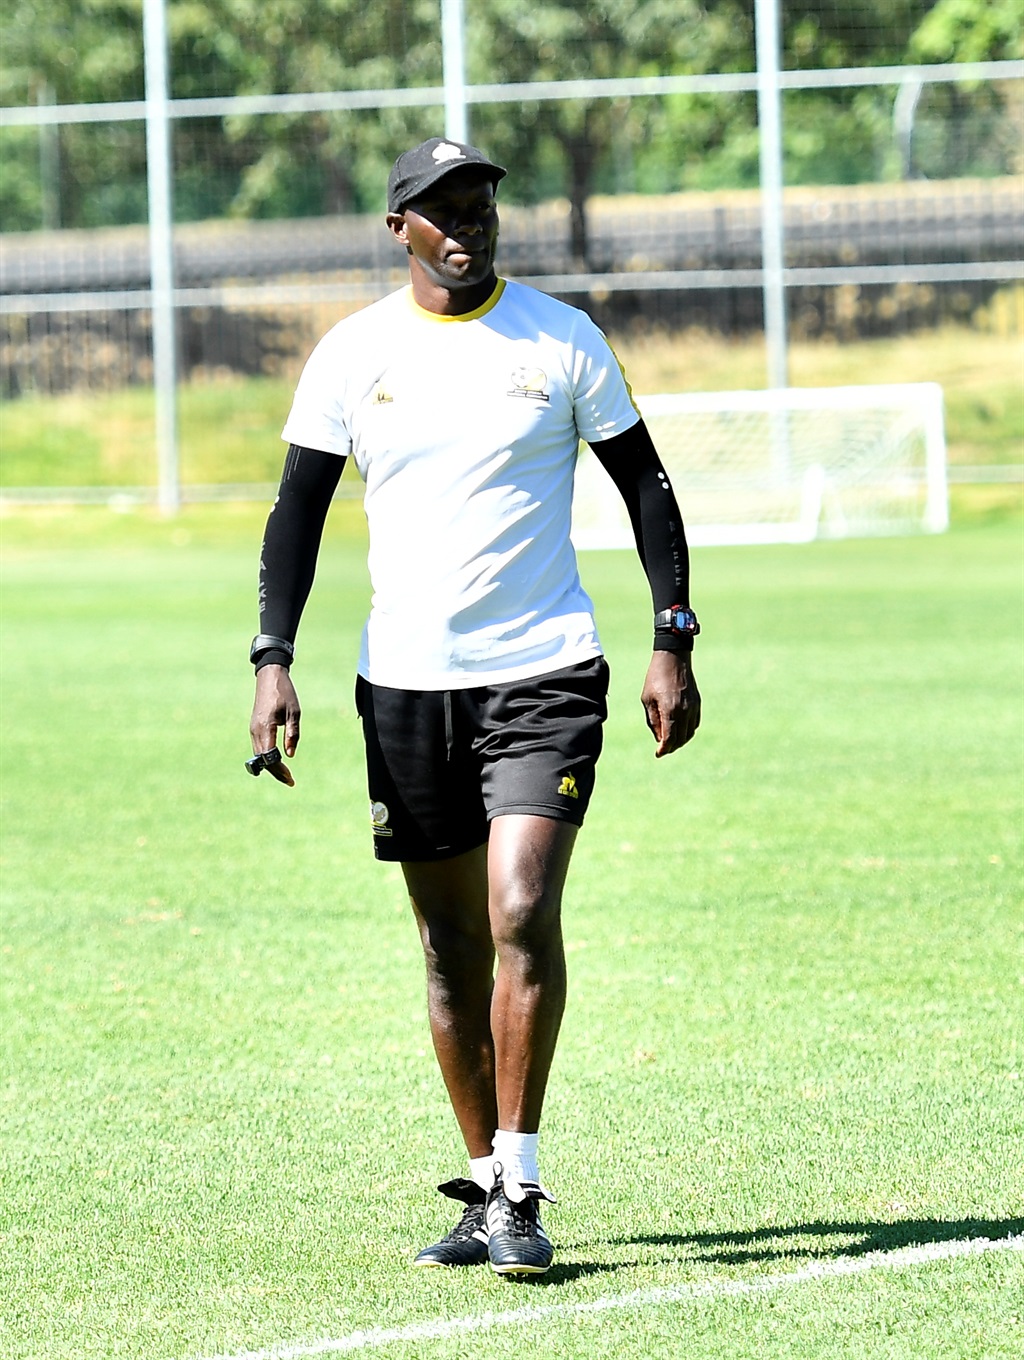 STELLENBOCH, SOUTH AFRICA - JANAURY 08: Helman Mkhalele during the South Africa national mens soccer team media open day at Lentelus Sportsground on January 08, 2023 in Stellenbosch, South Africa. (Photo by Ashley Vlotman/Gallo Images)